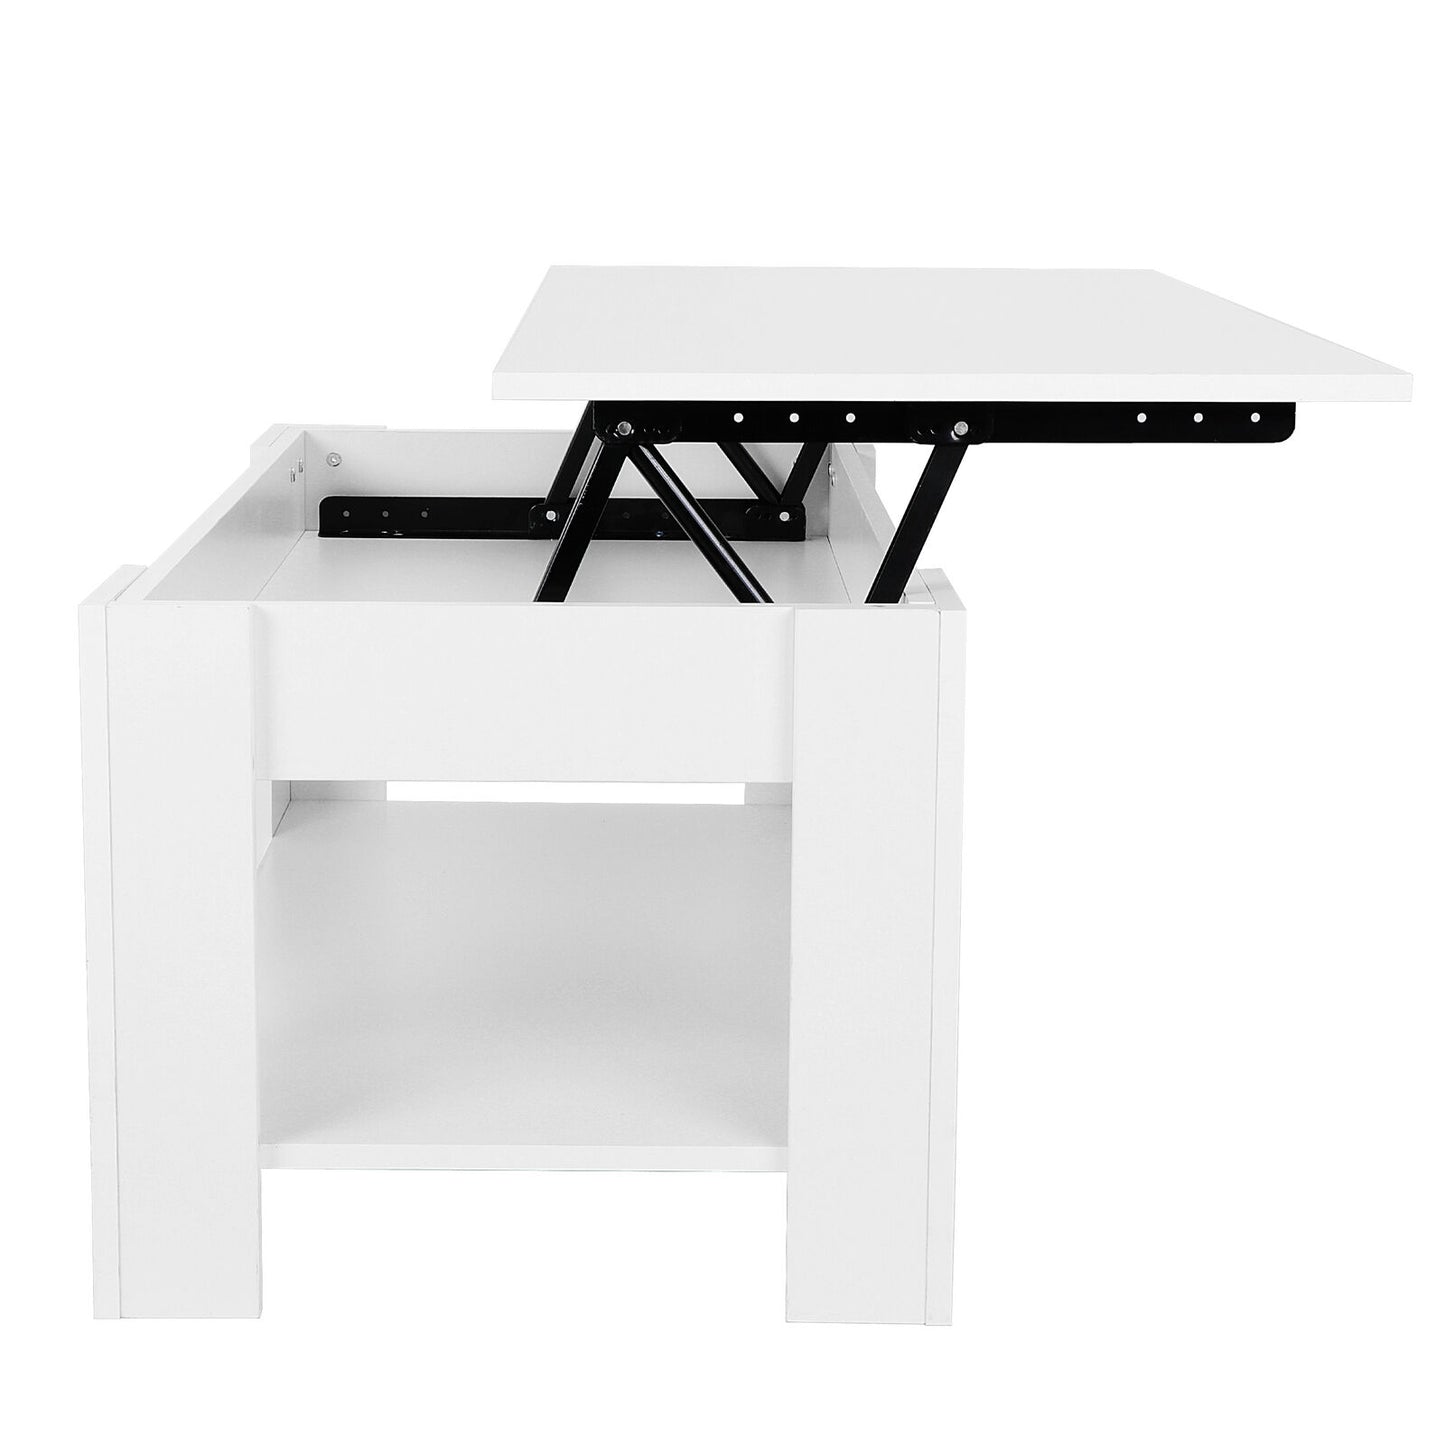 Modern Lift-up Top Tea Coffee Table Hidden Storage Compartment Furniture White